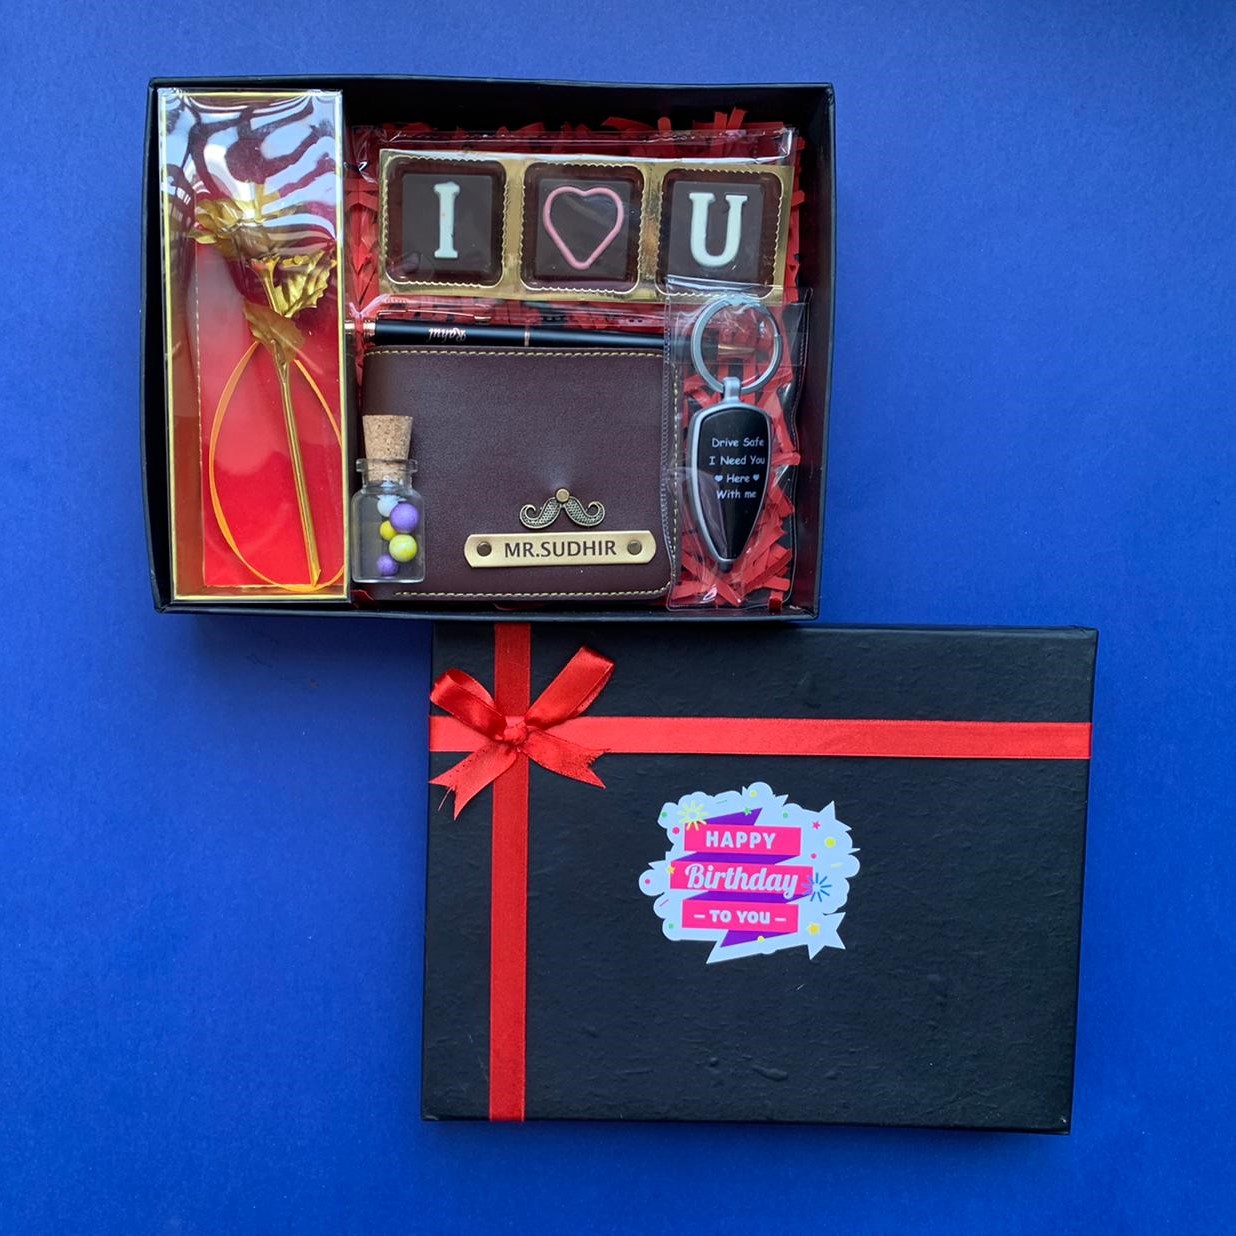 Valentine Gifts For Him | Customized wallet & perfume romantic combo for men